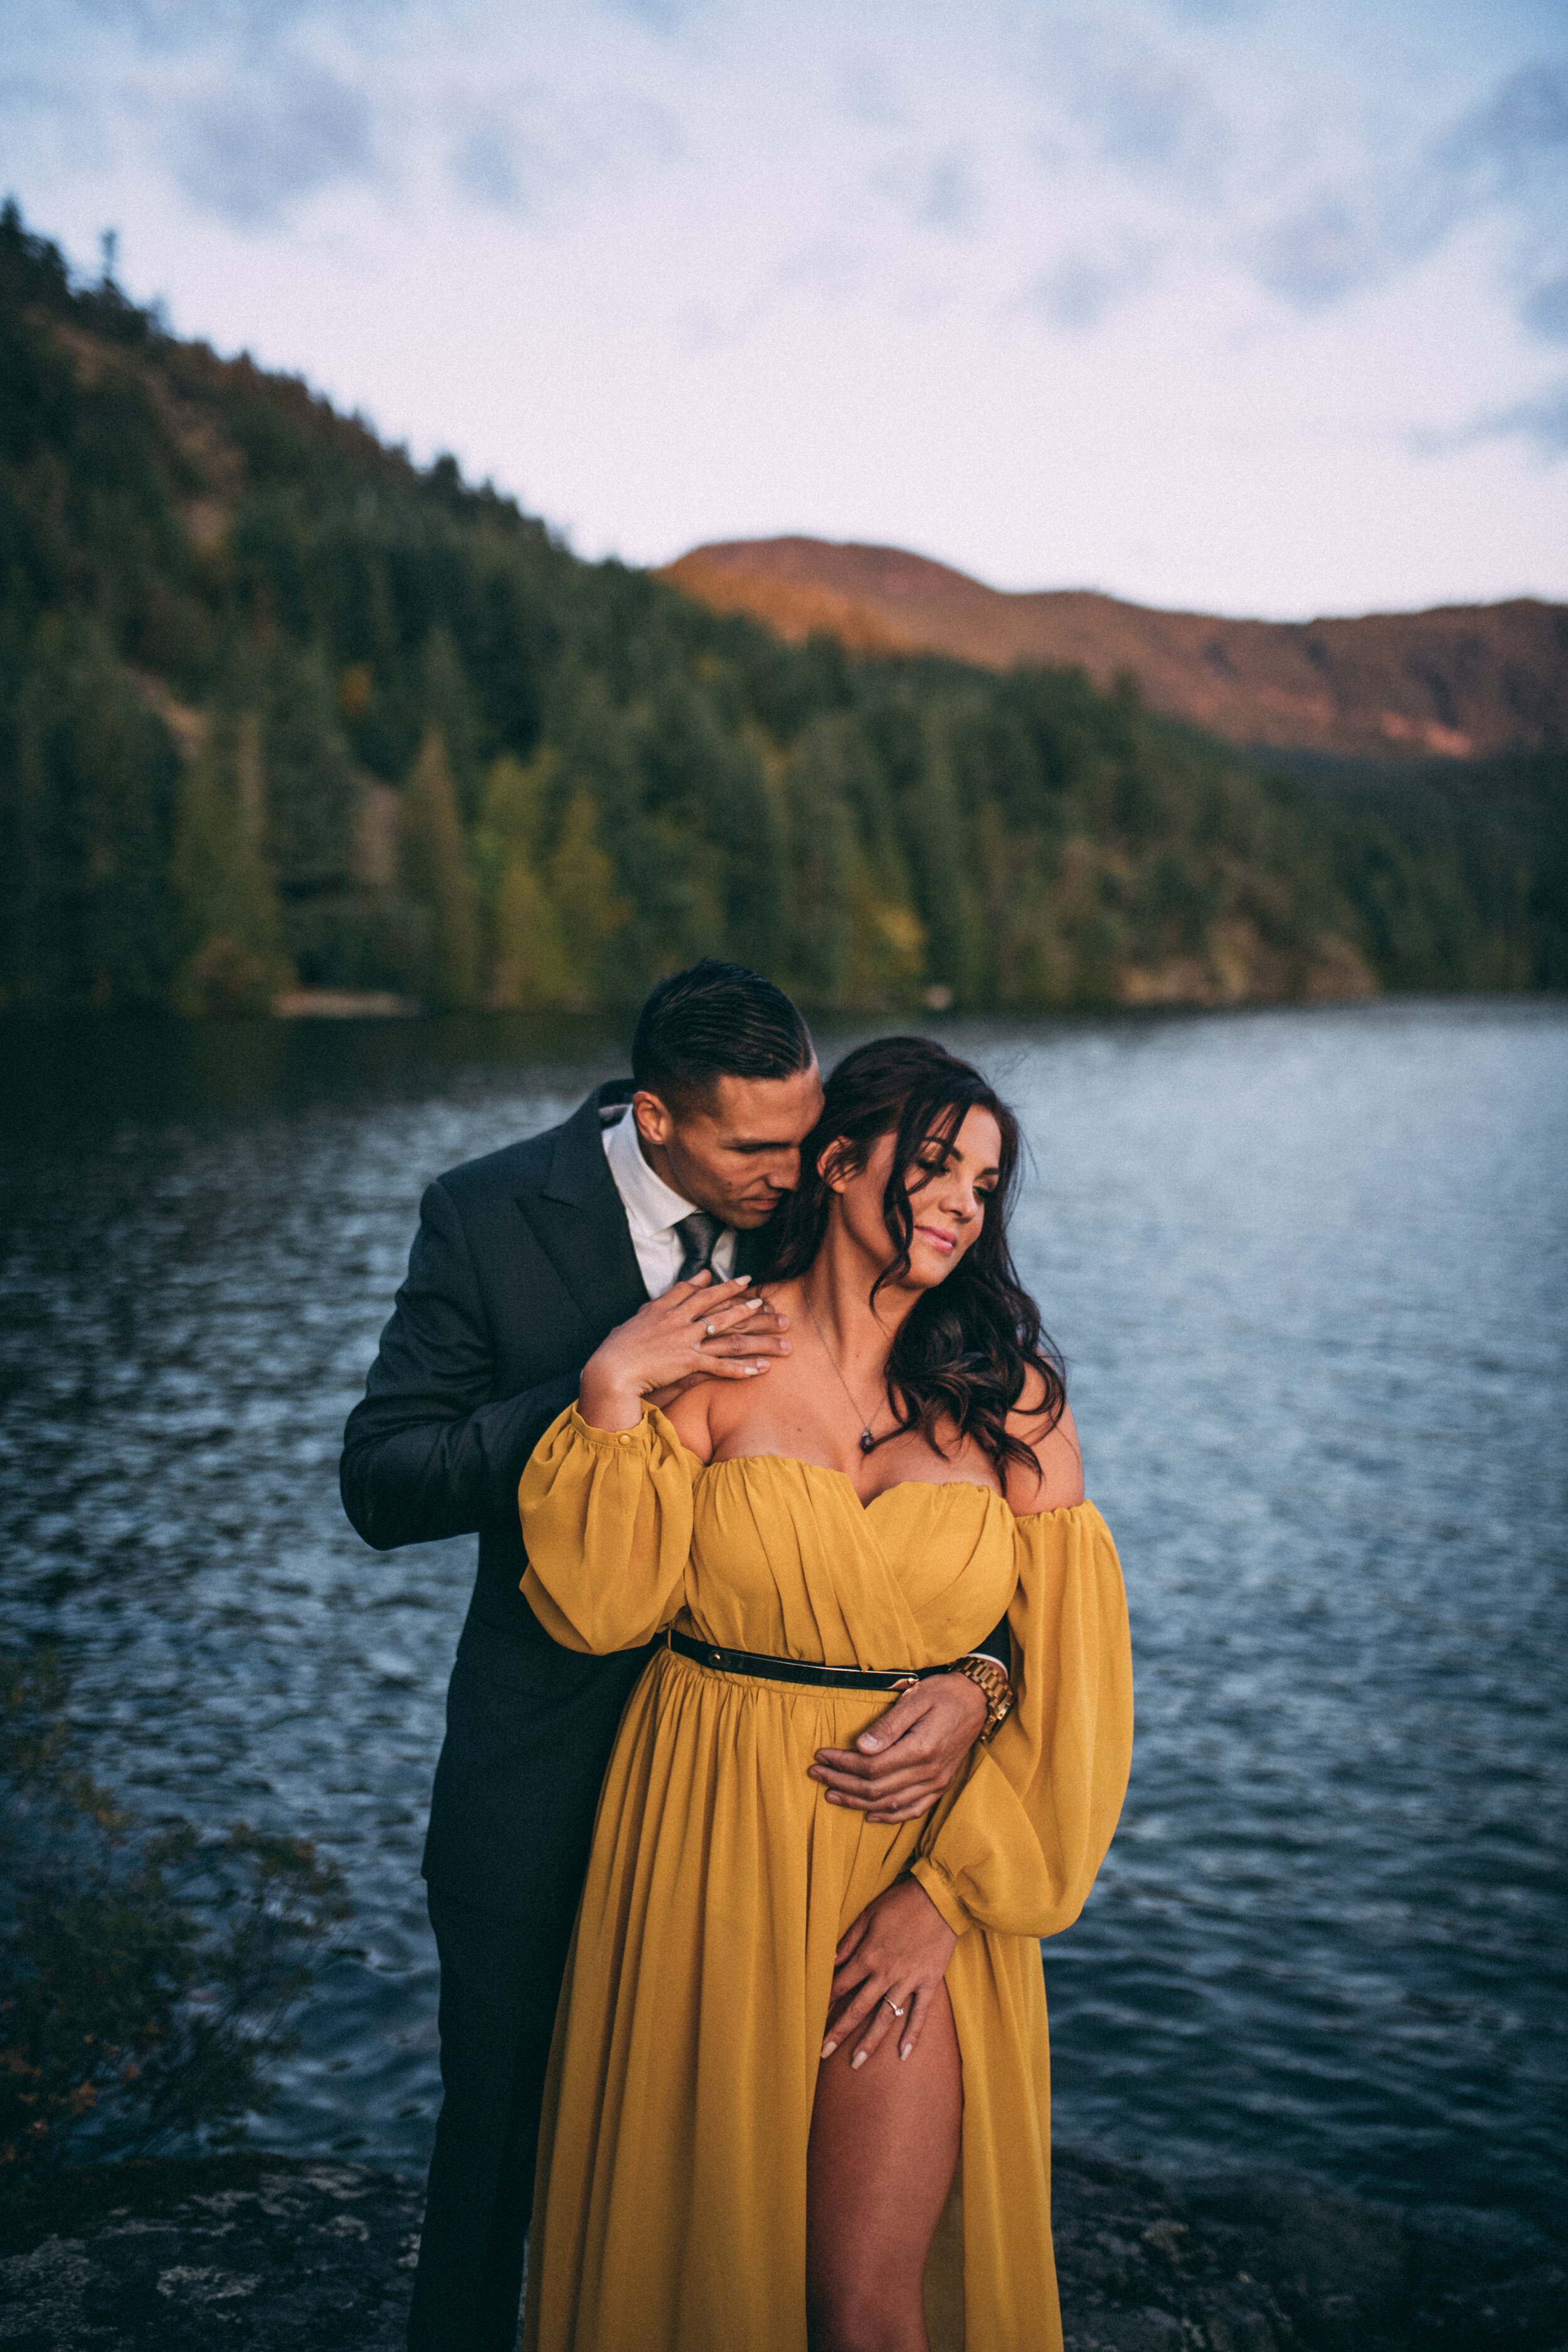 Caitlin & Kevin - Ruby Lake Engagement Session - Pender Harbour, BC - Laura Olson Photography - Sunshine Coast BC Wedding & Elopement Photographer-8869.jpg